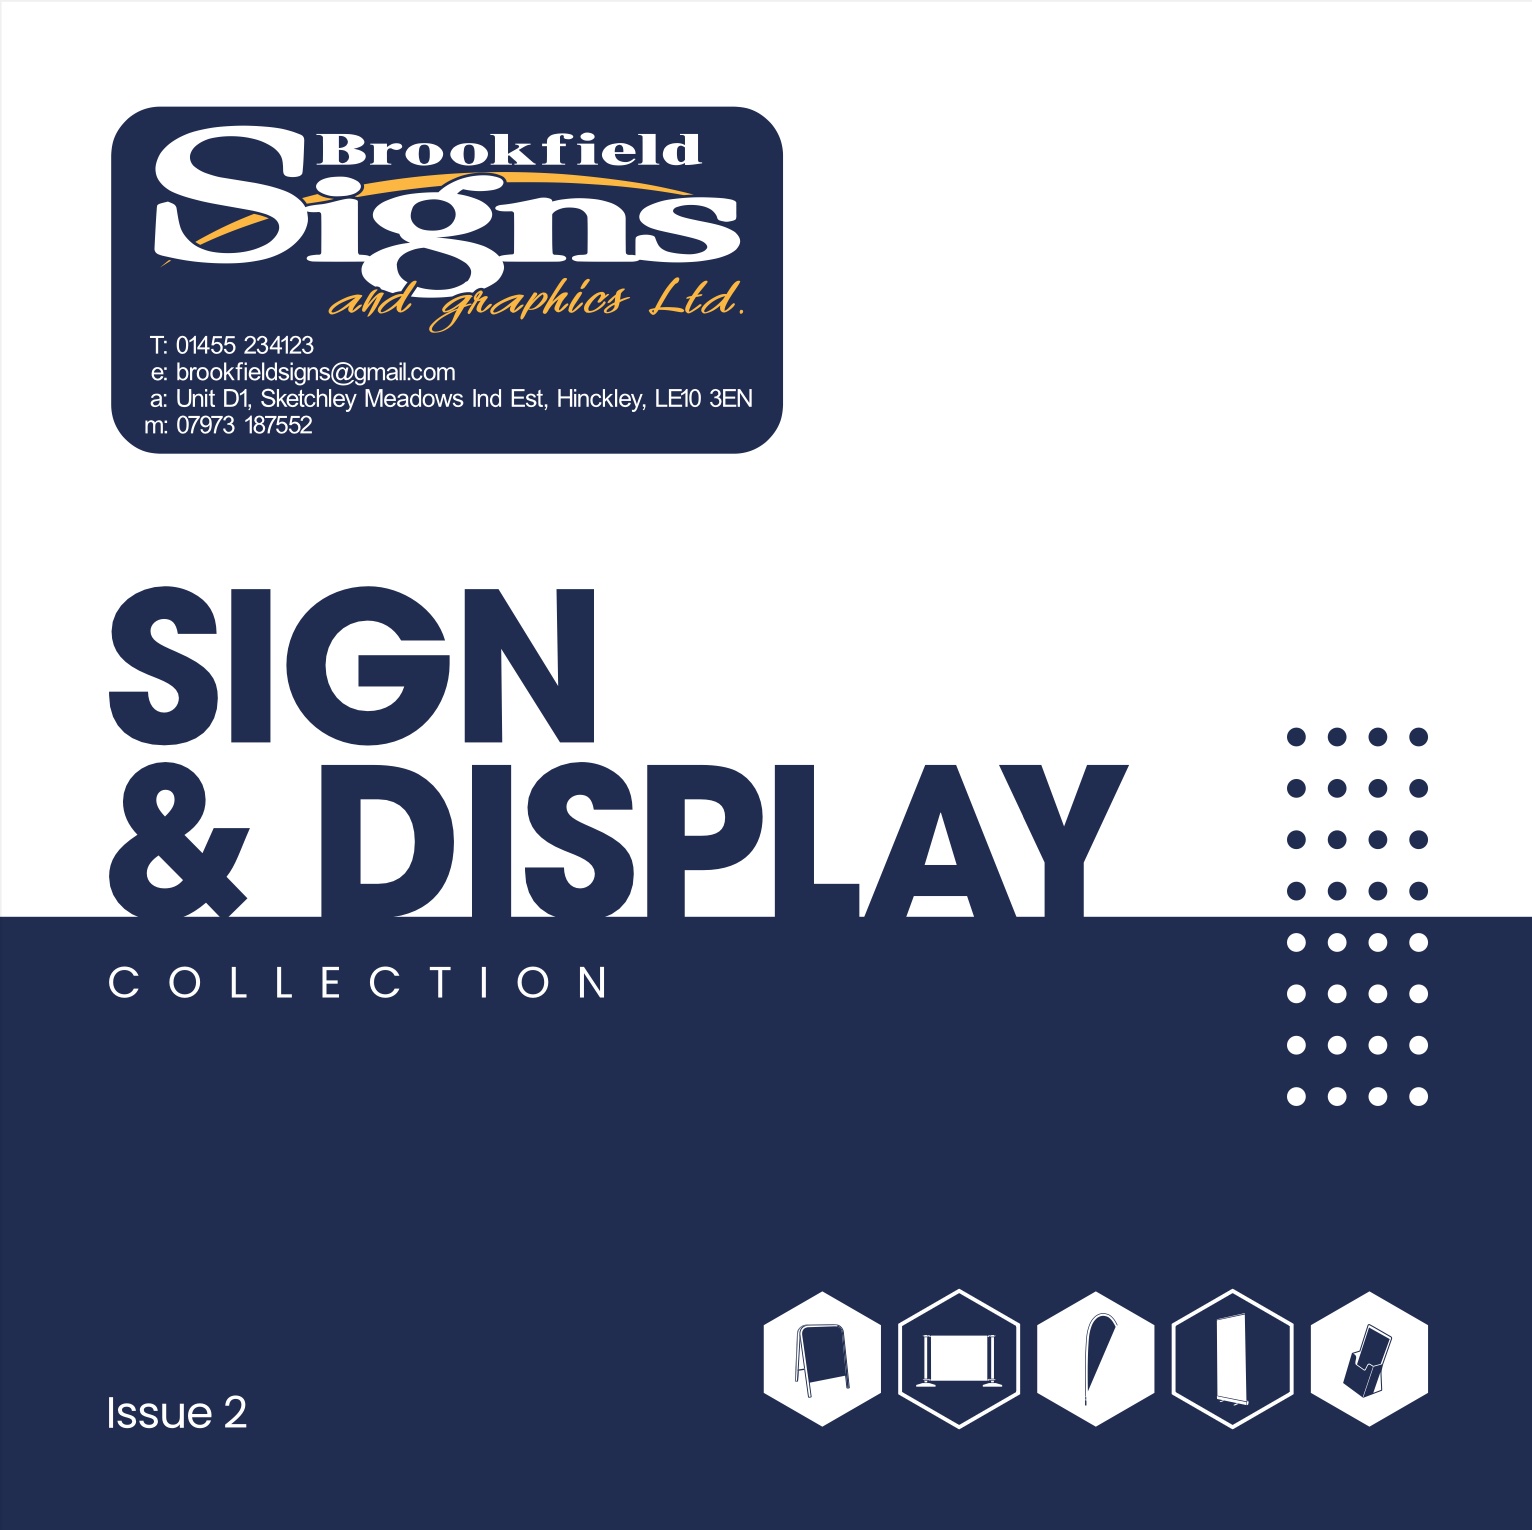 Brookfield Signs and Graphics Ltd, your one-stop-shop for all your signage needs.